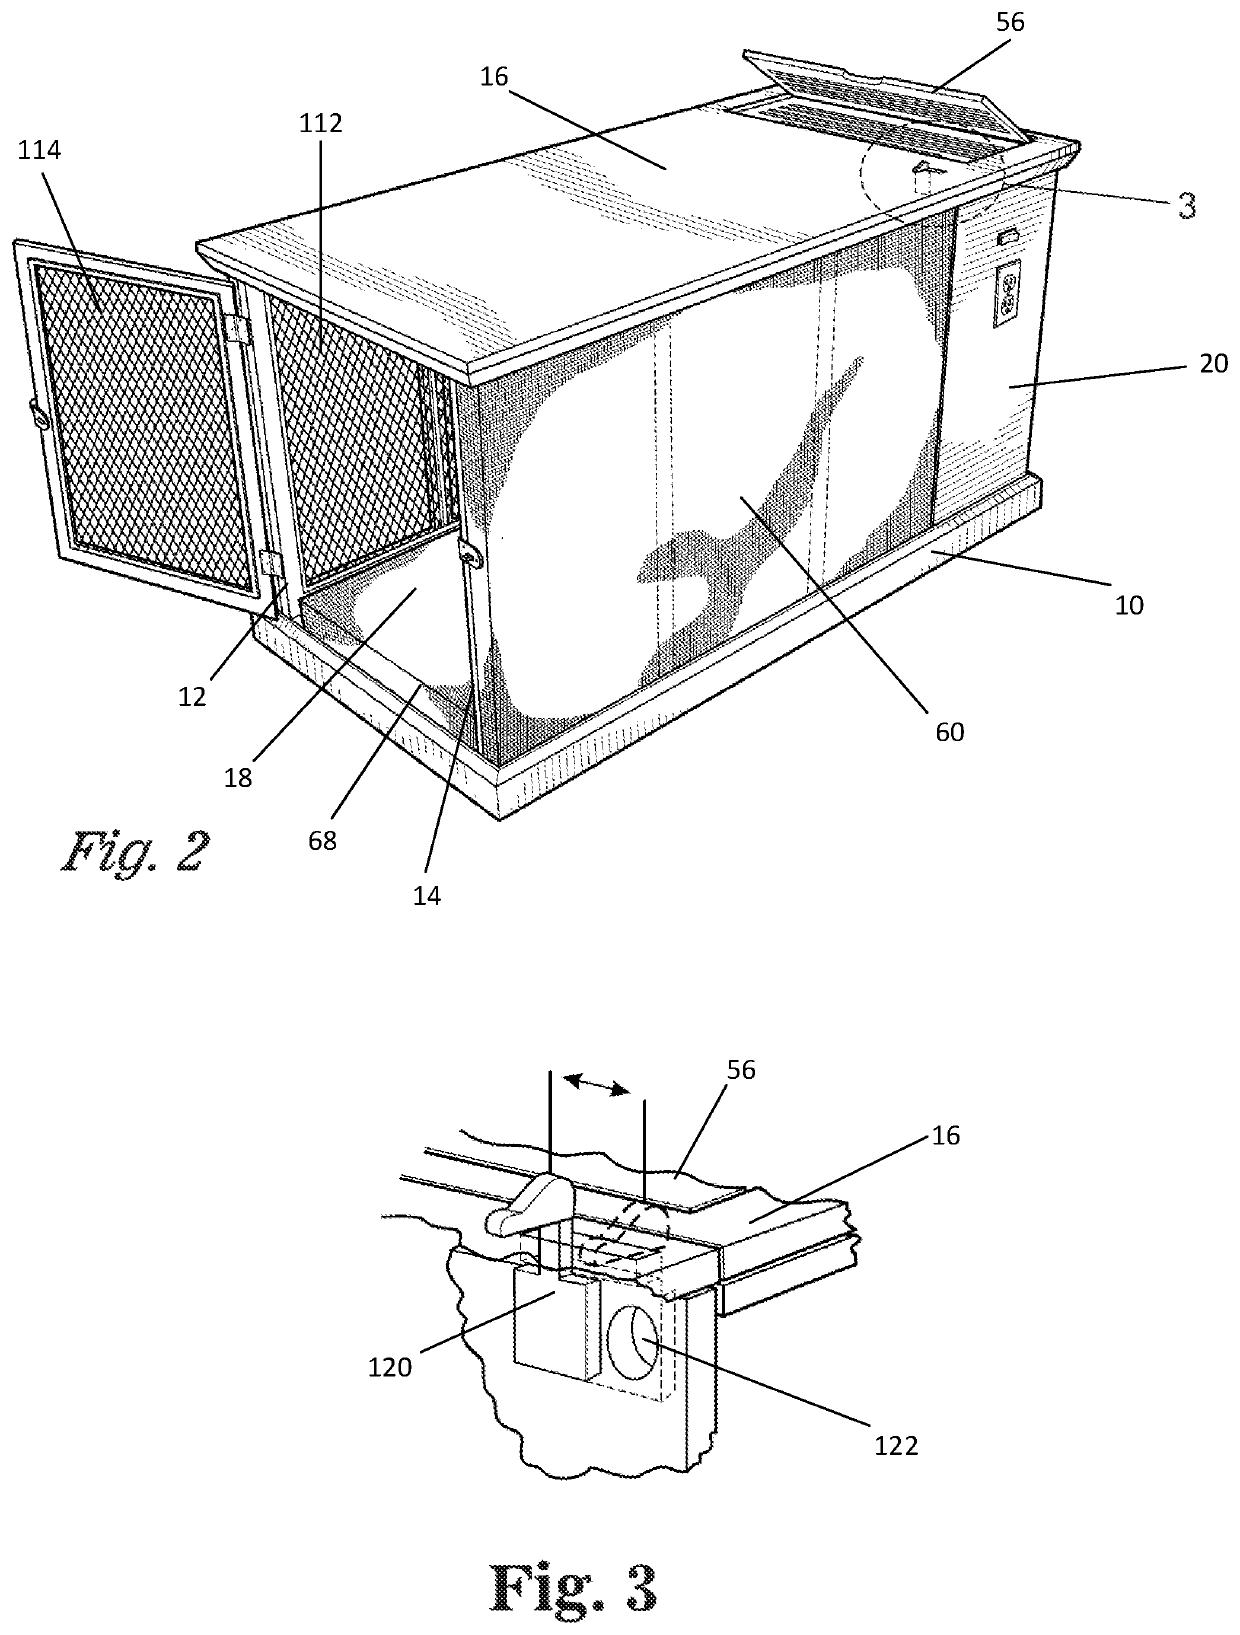 Air filtration and control system for an animal housing